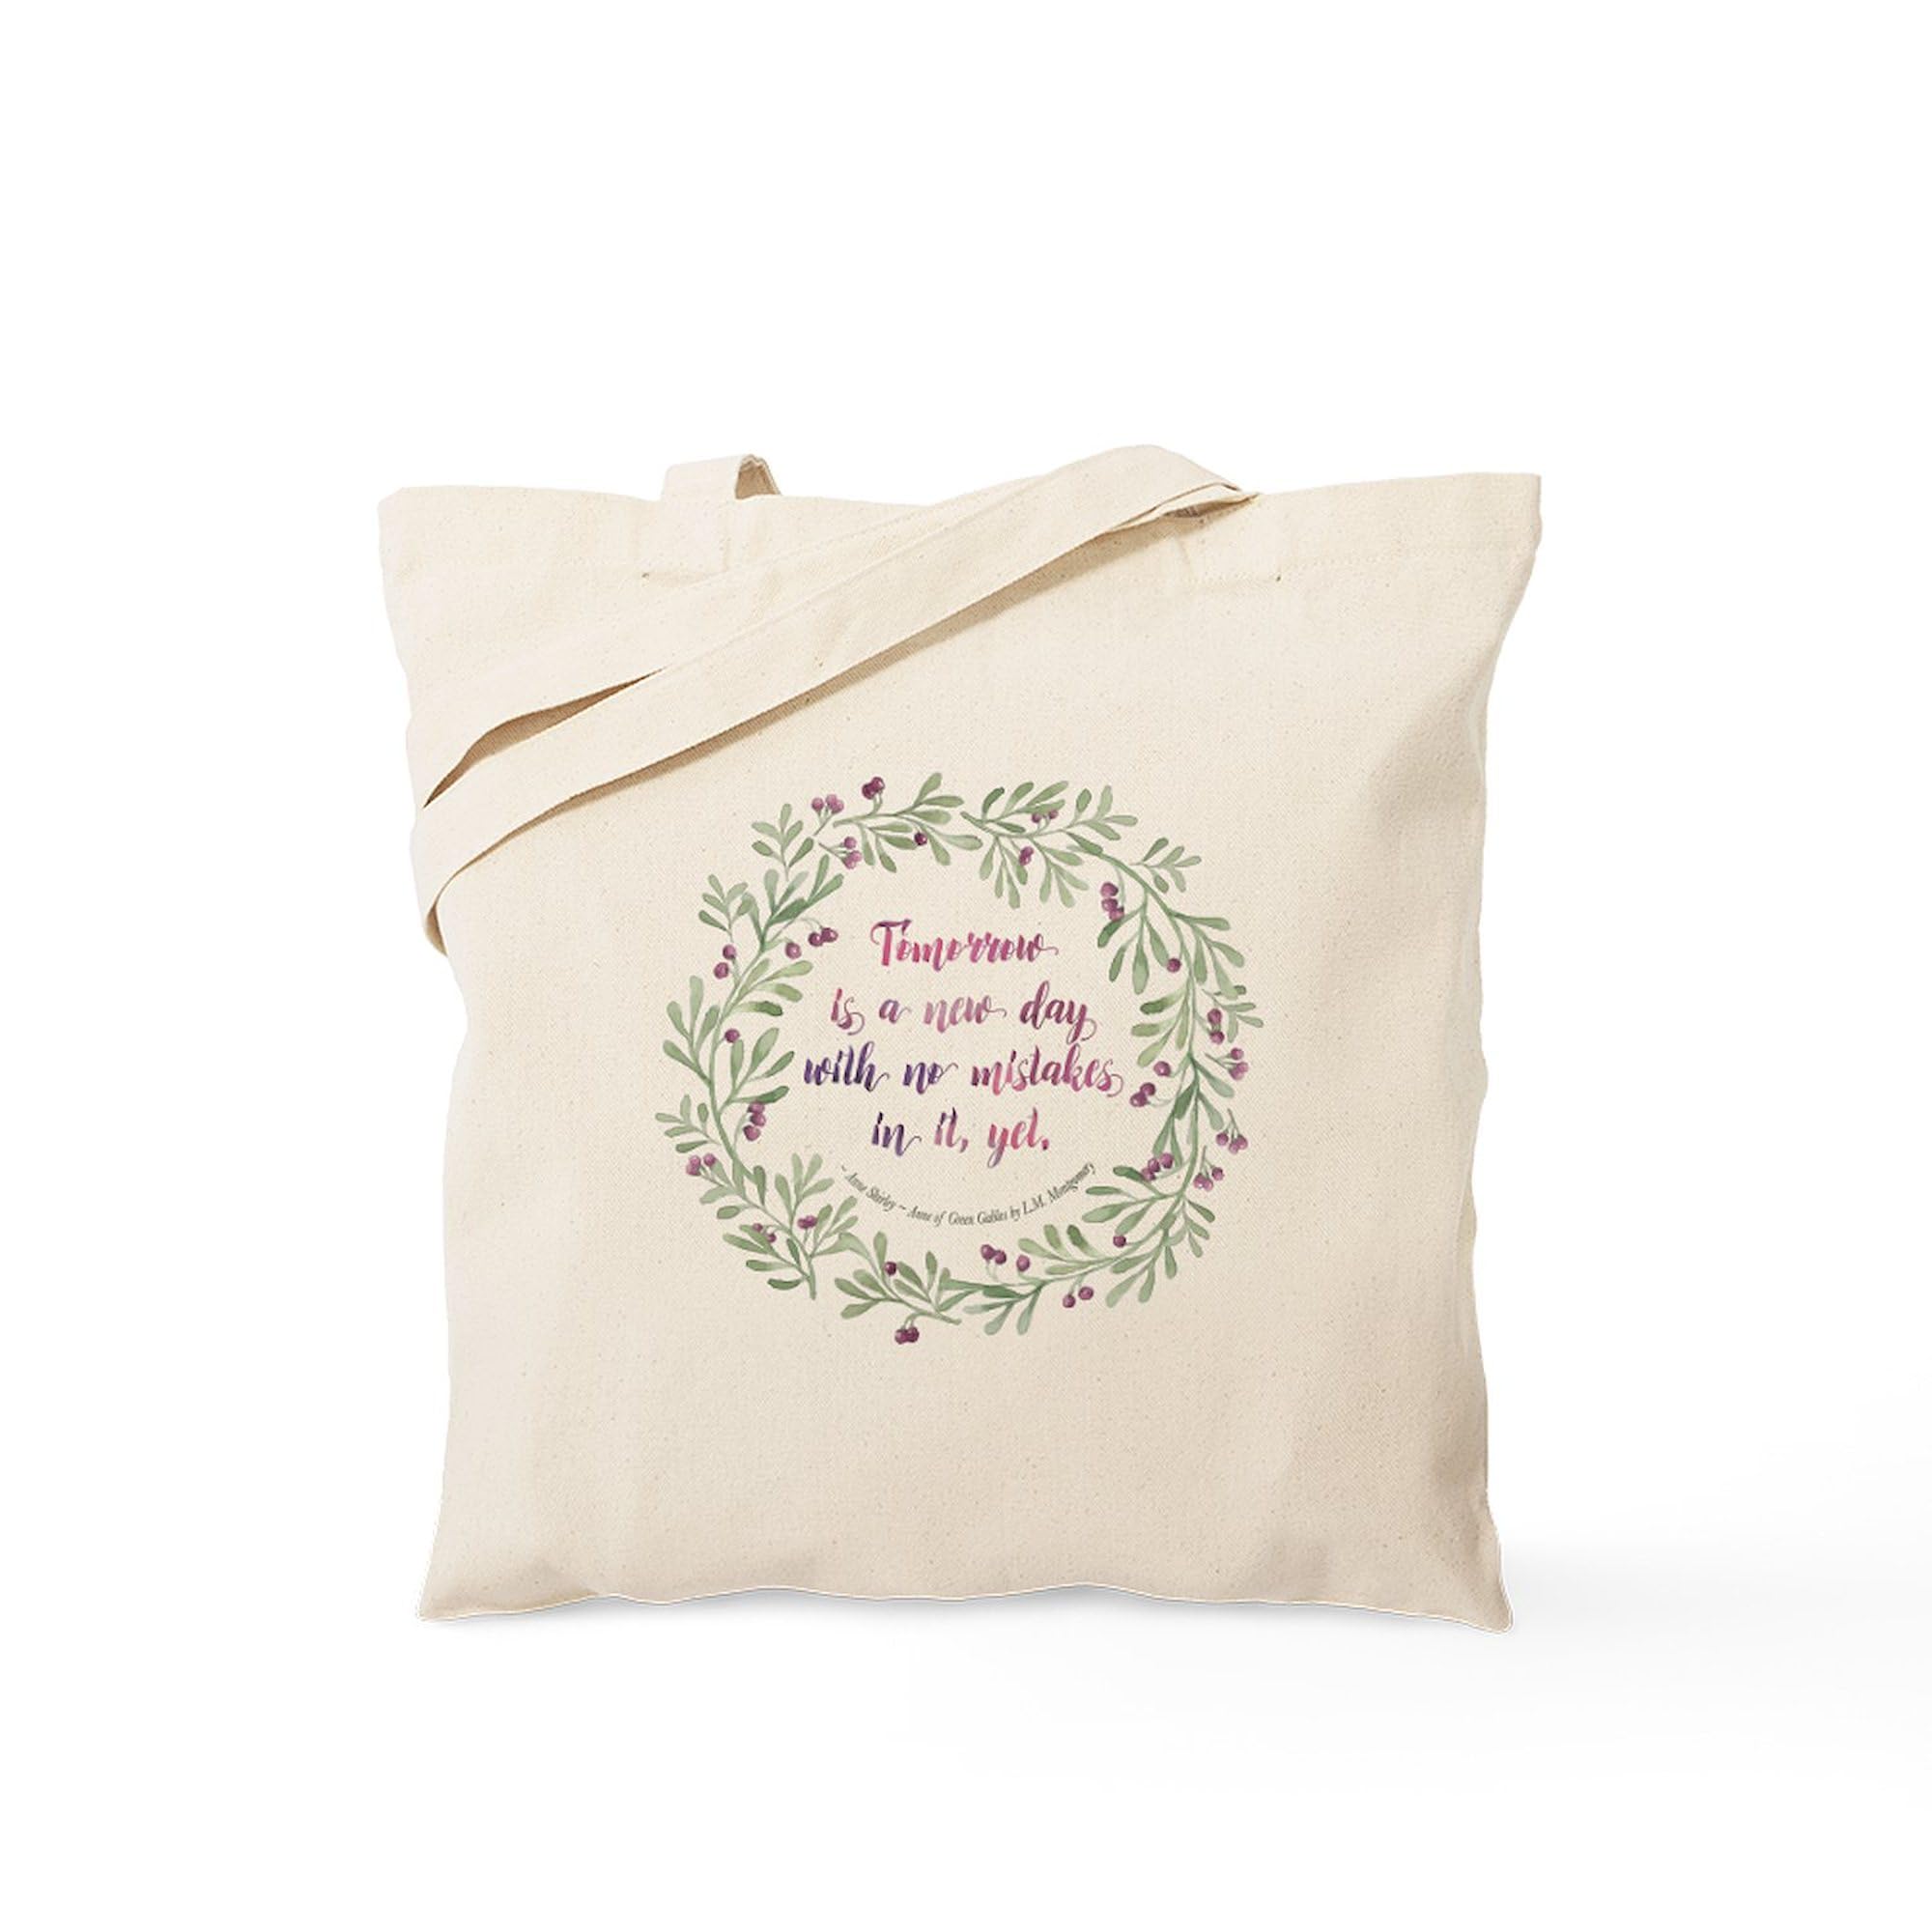 CafePress Tote Bag Anne Of Green Gables Quote Canvas Tote Shopping Bag